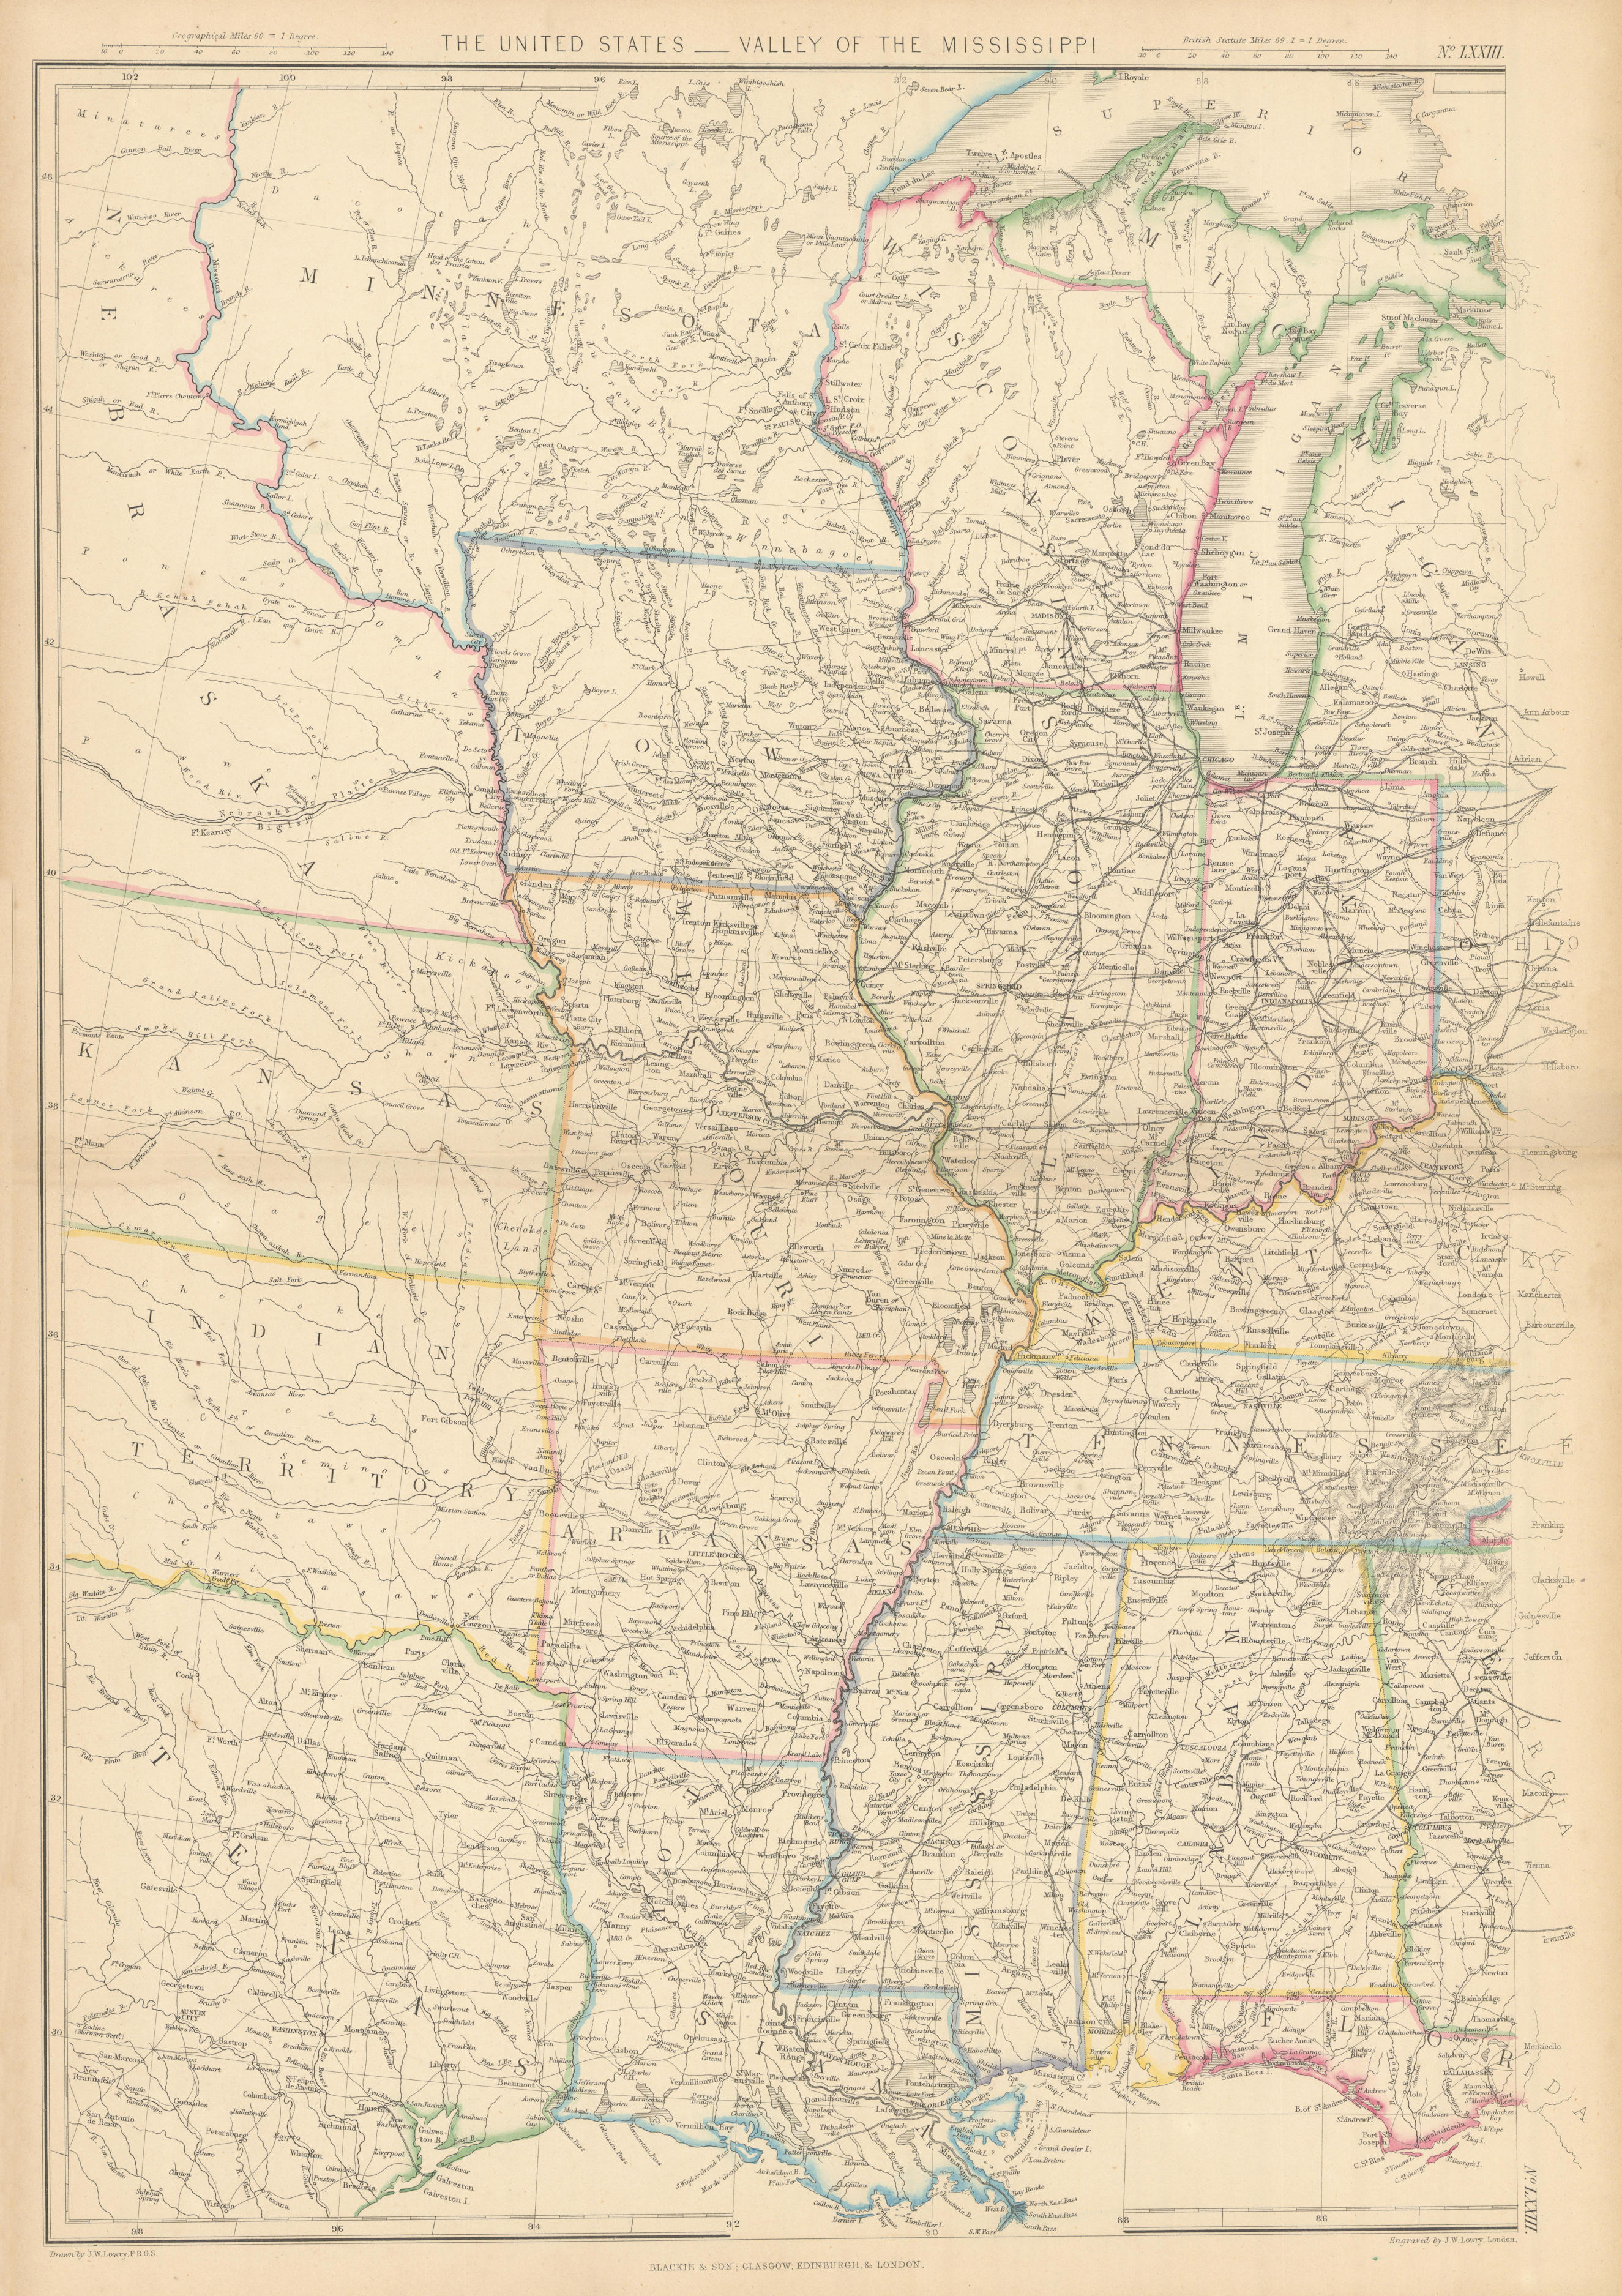 Associate Product United States - Valley of the Mississippi by Joseph Wilson Lowry. USA 1859 map